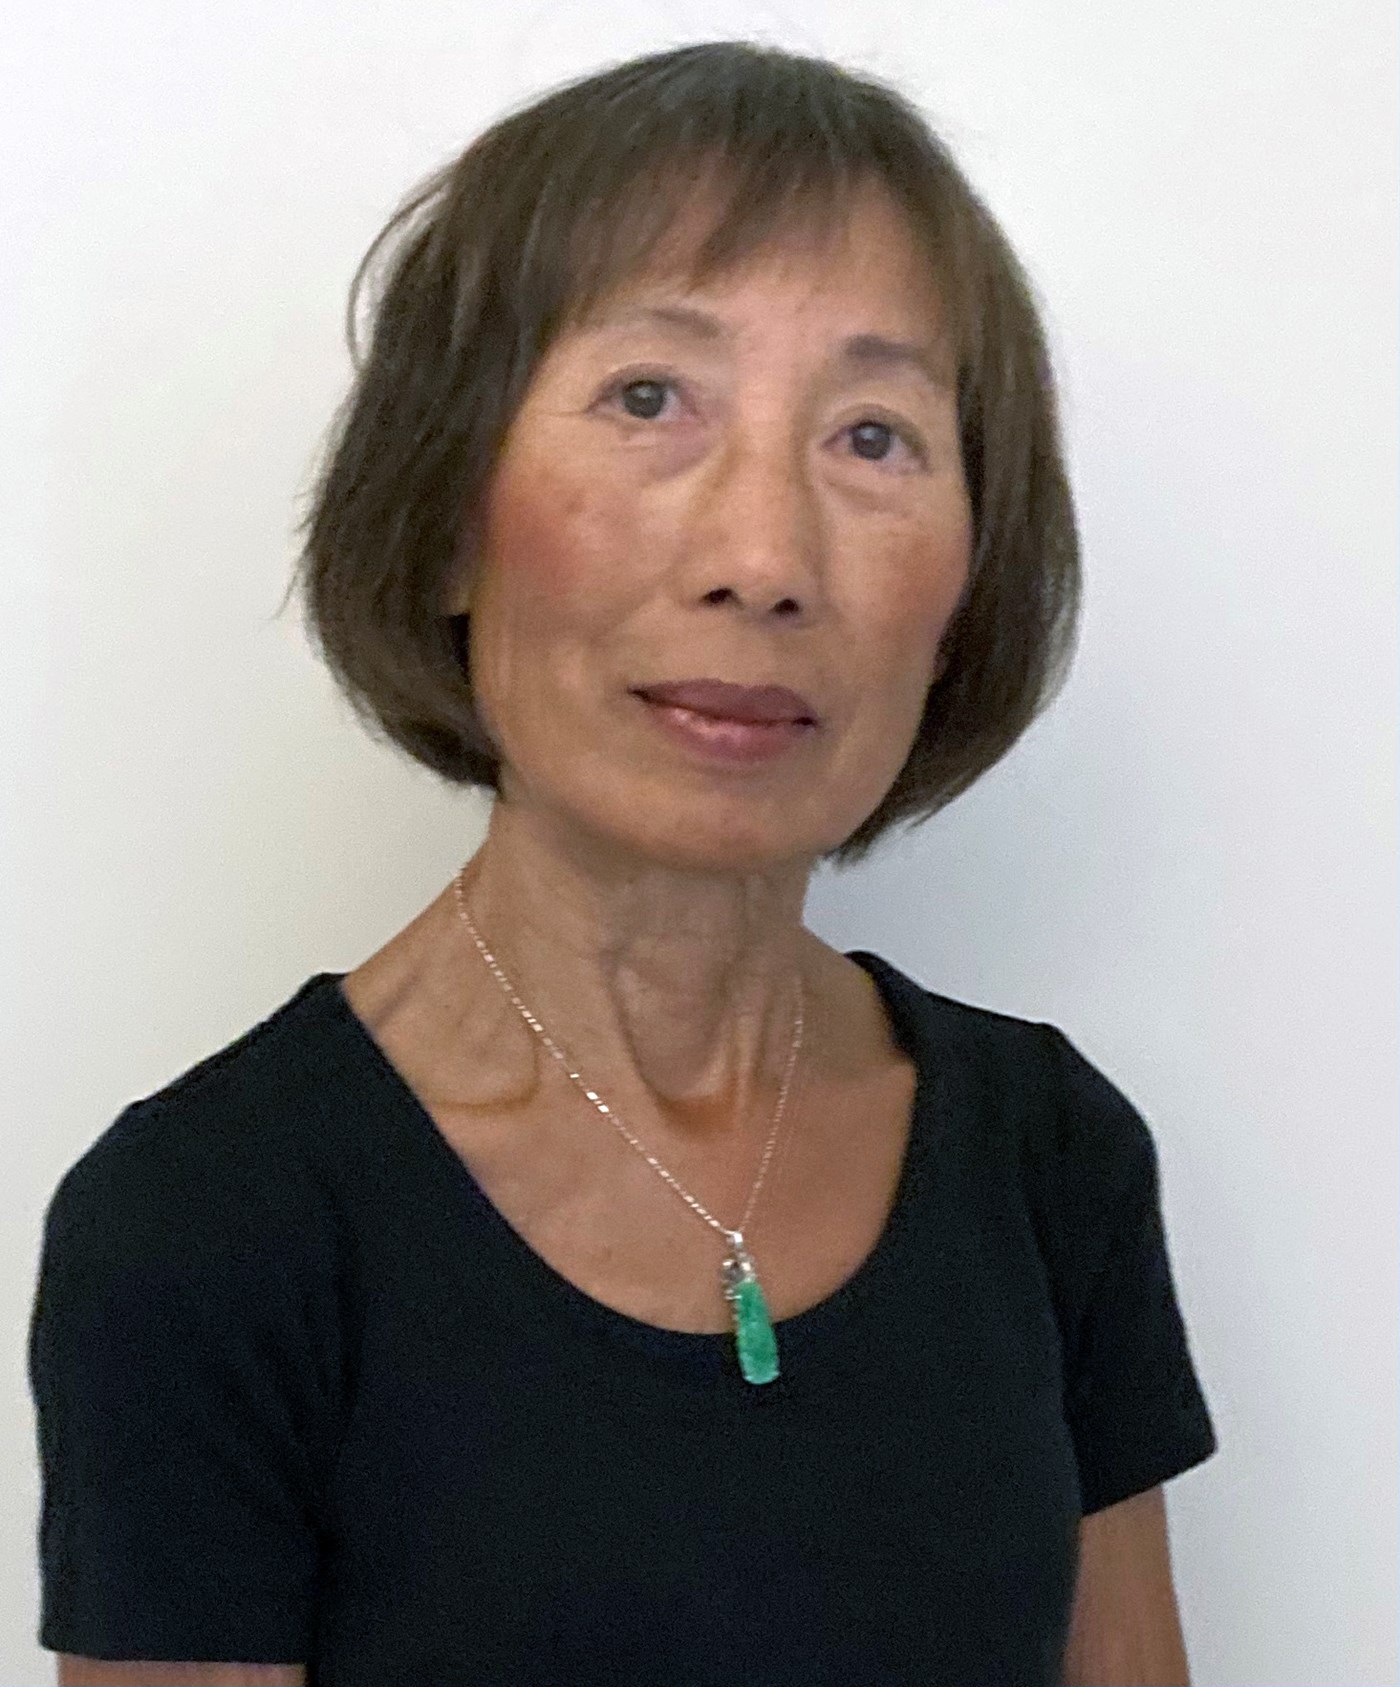 Jane Grossman is an Instructor Emeritus in the Mathematical Sciences Department at UMass Lowell.